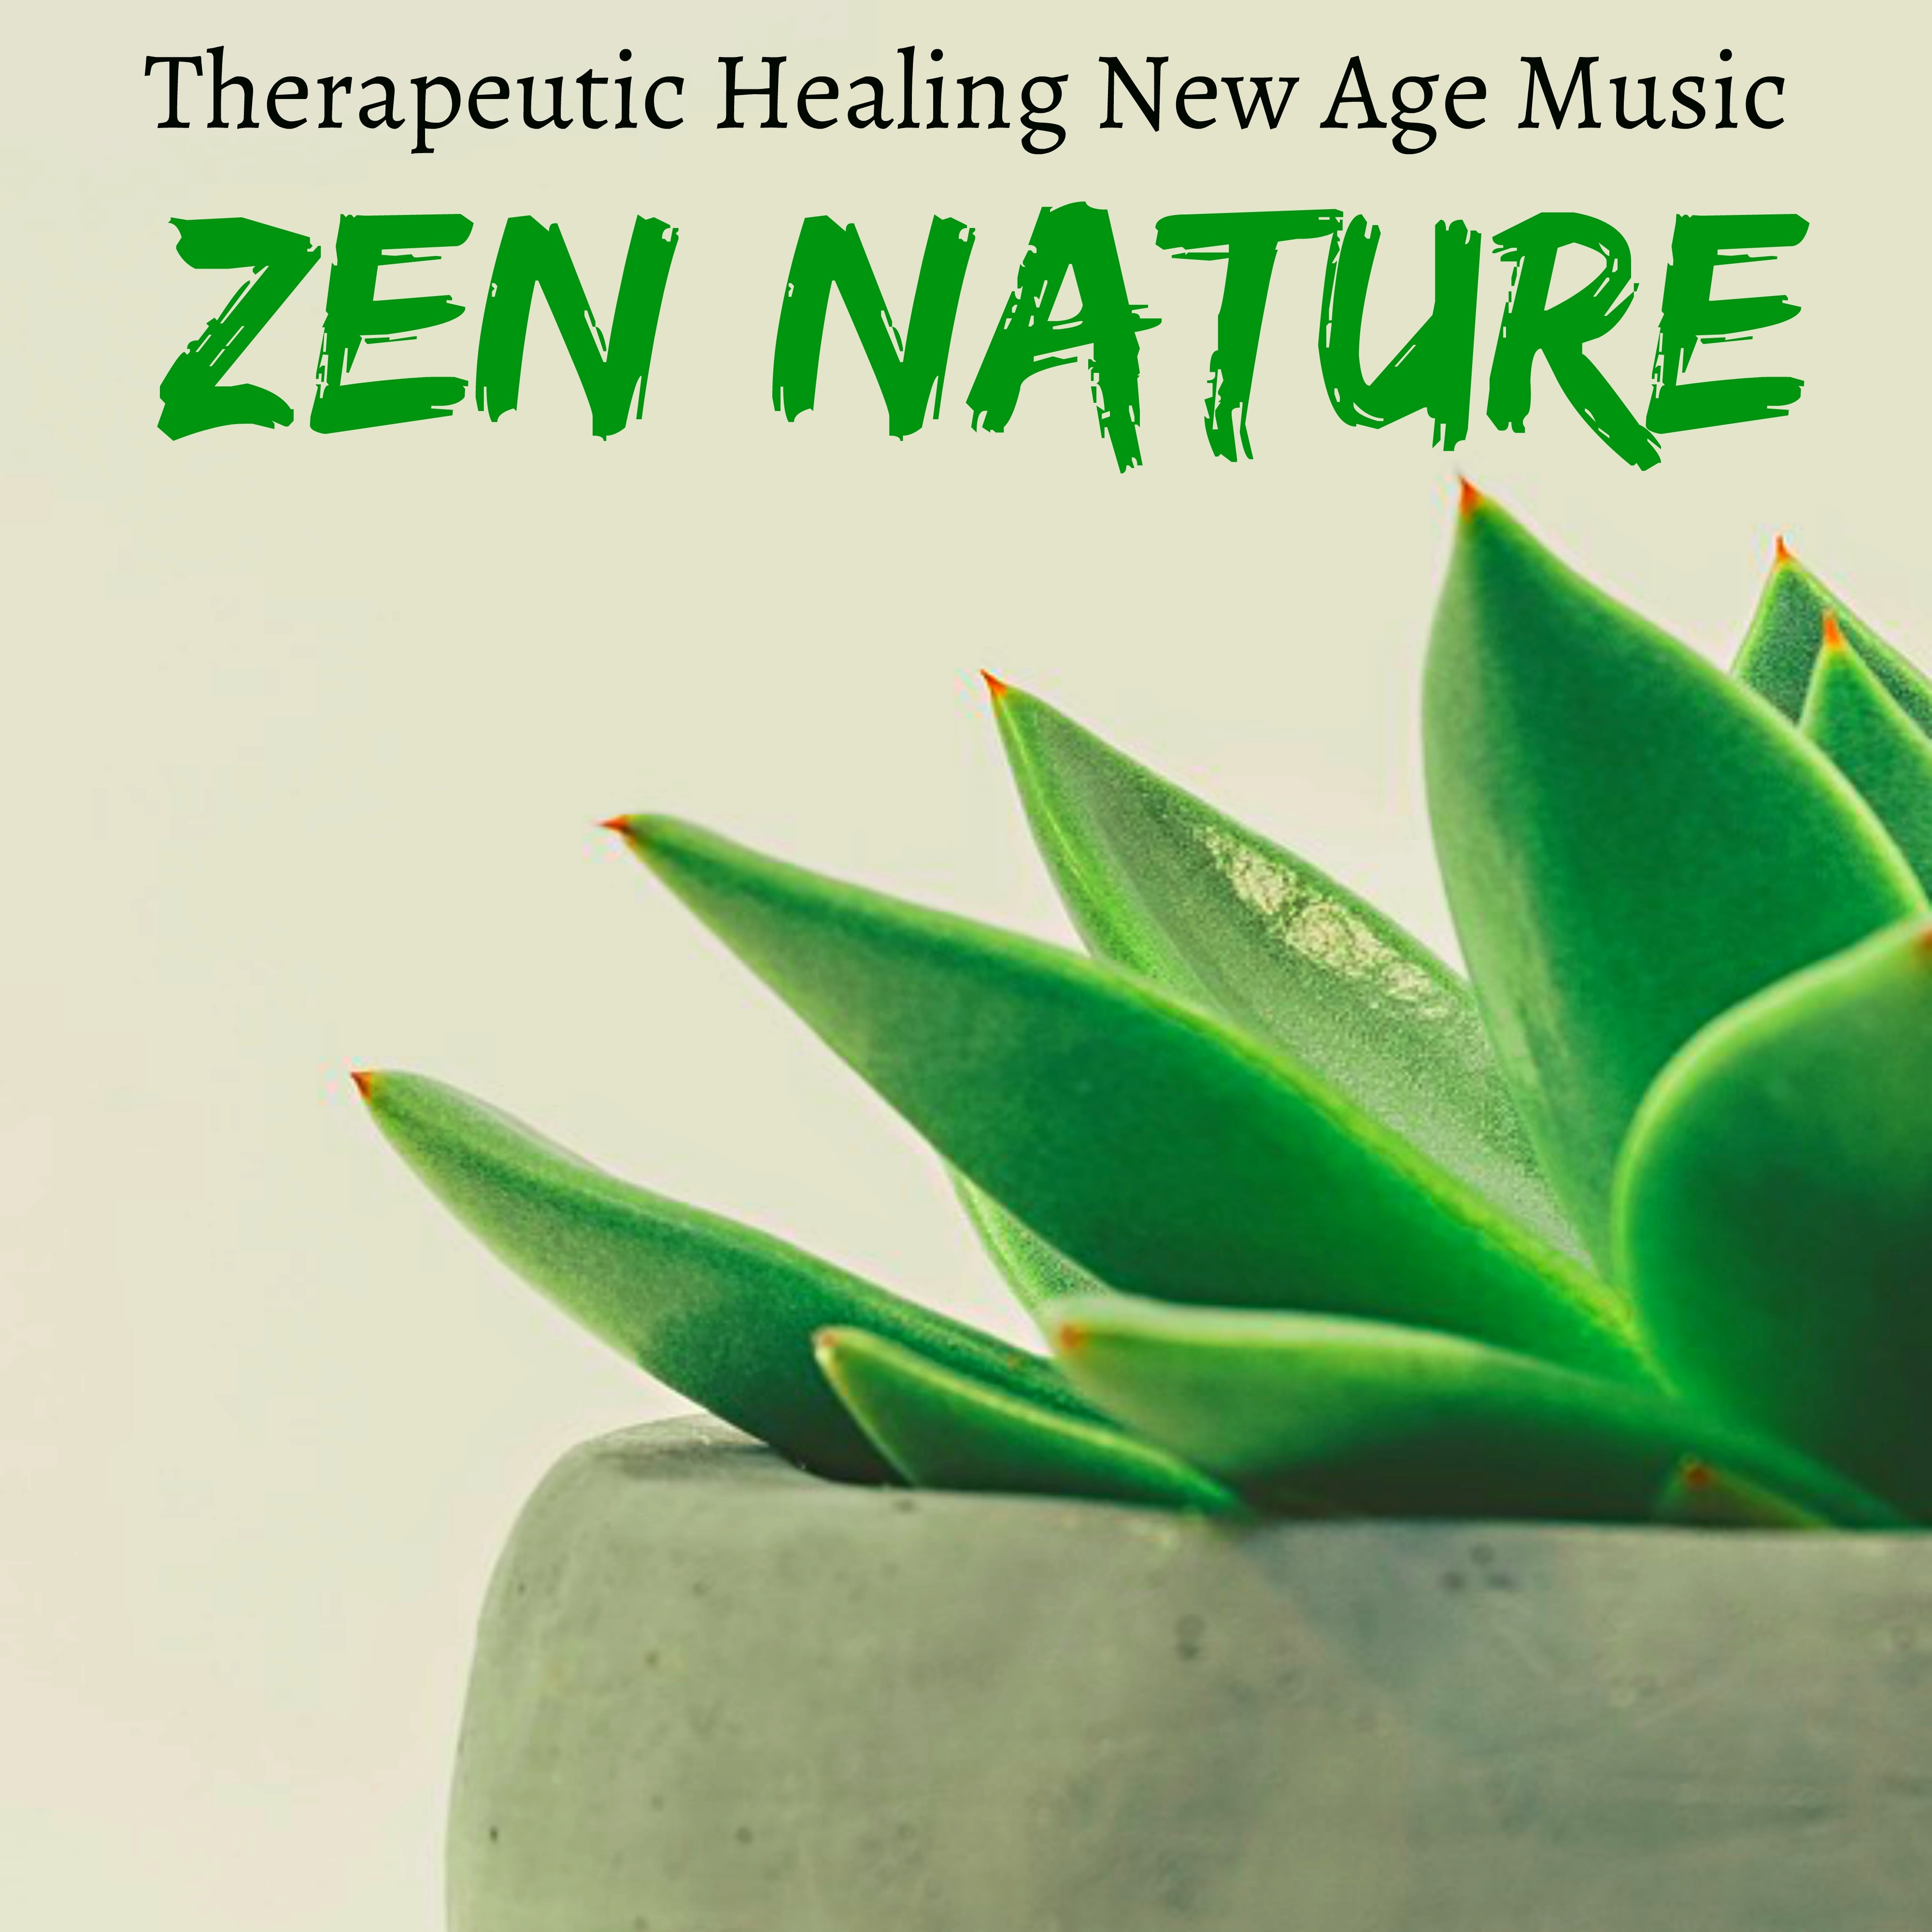 Zen Nature - Therapeutic Healing New Age Music for Meditation Buddhism Chakra Balancing Calm Study with Natural Instrumental Binaural Sounds